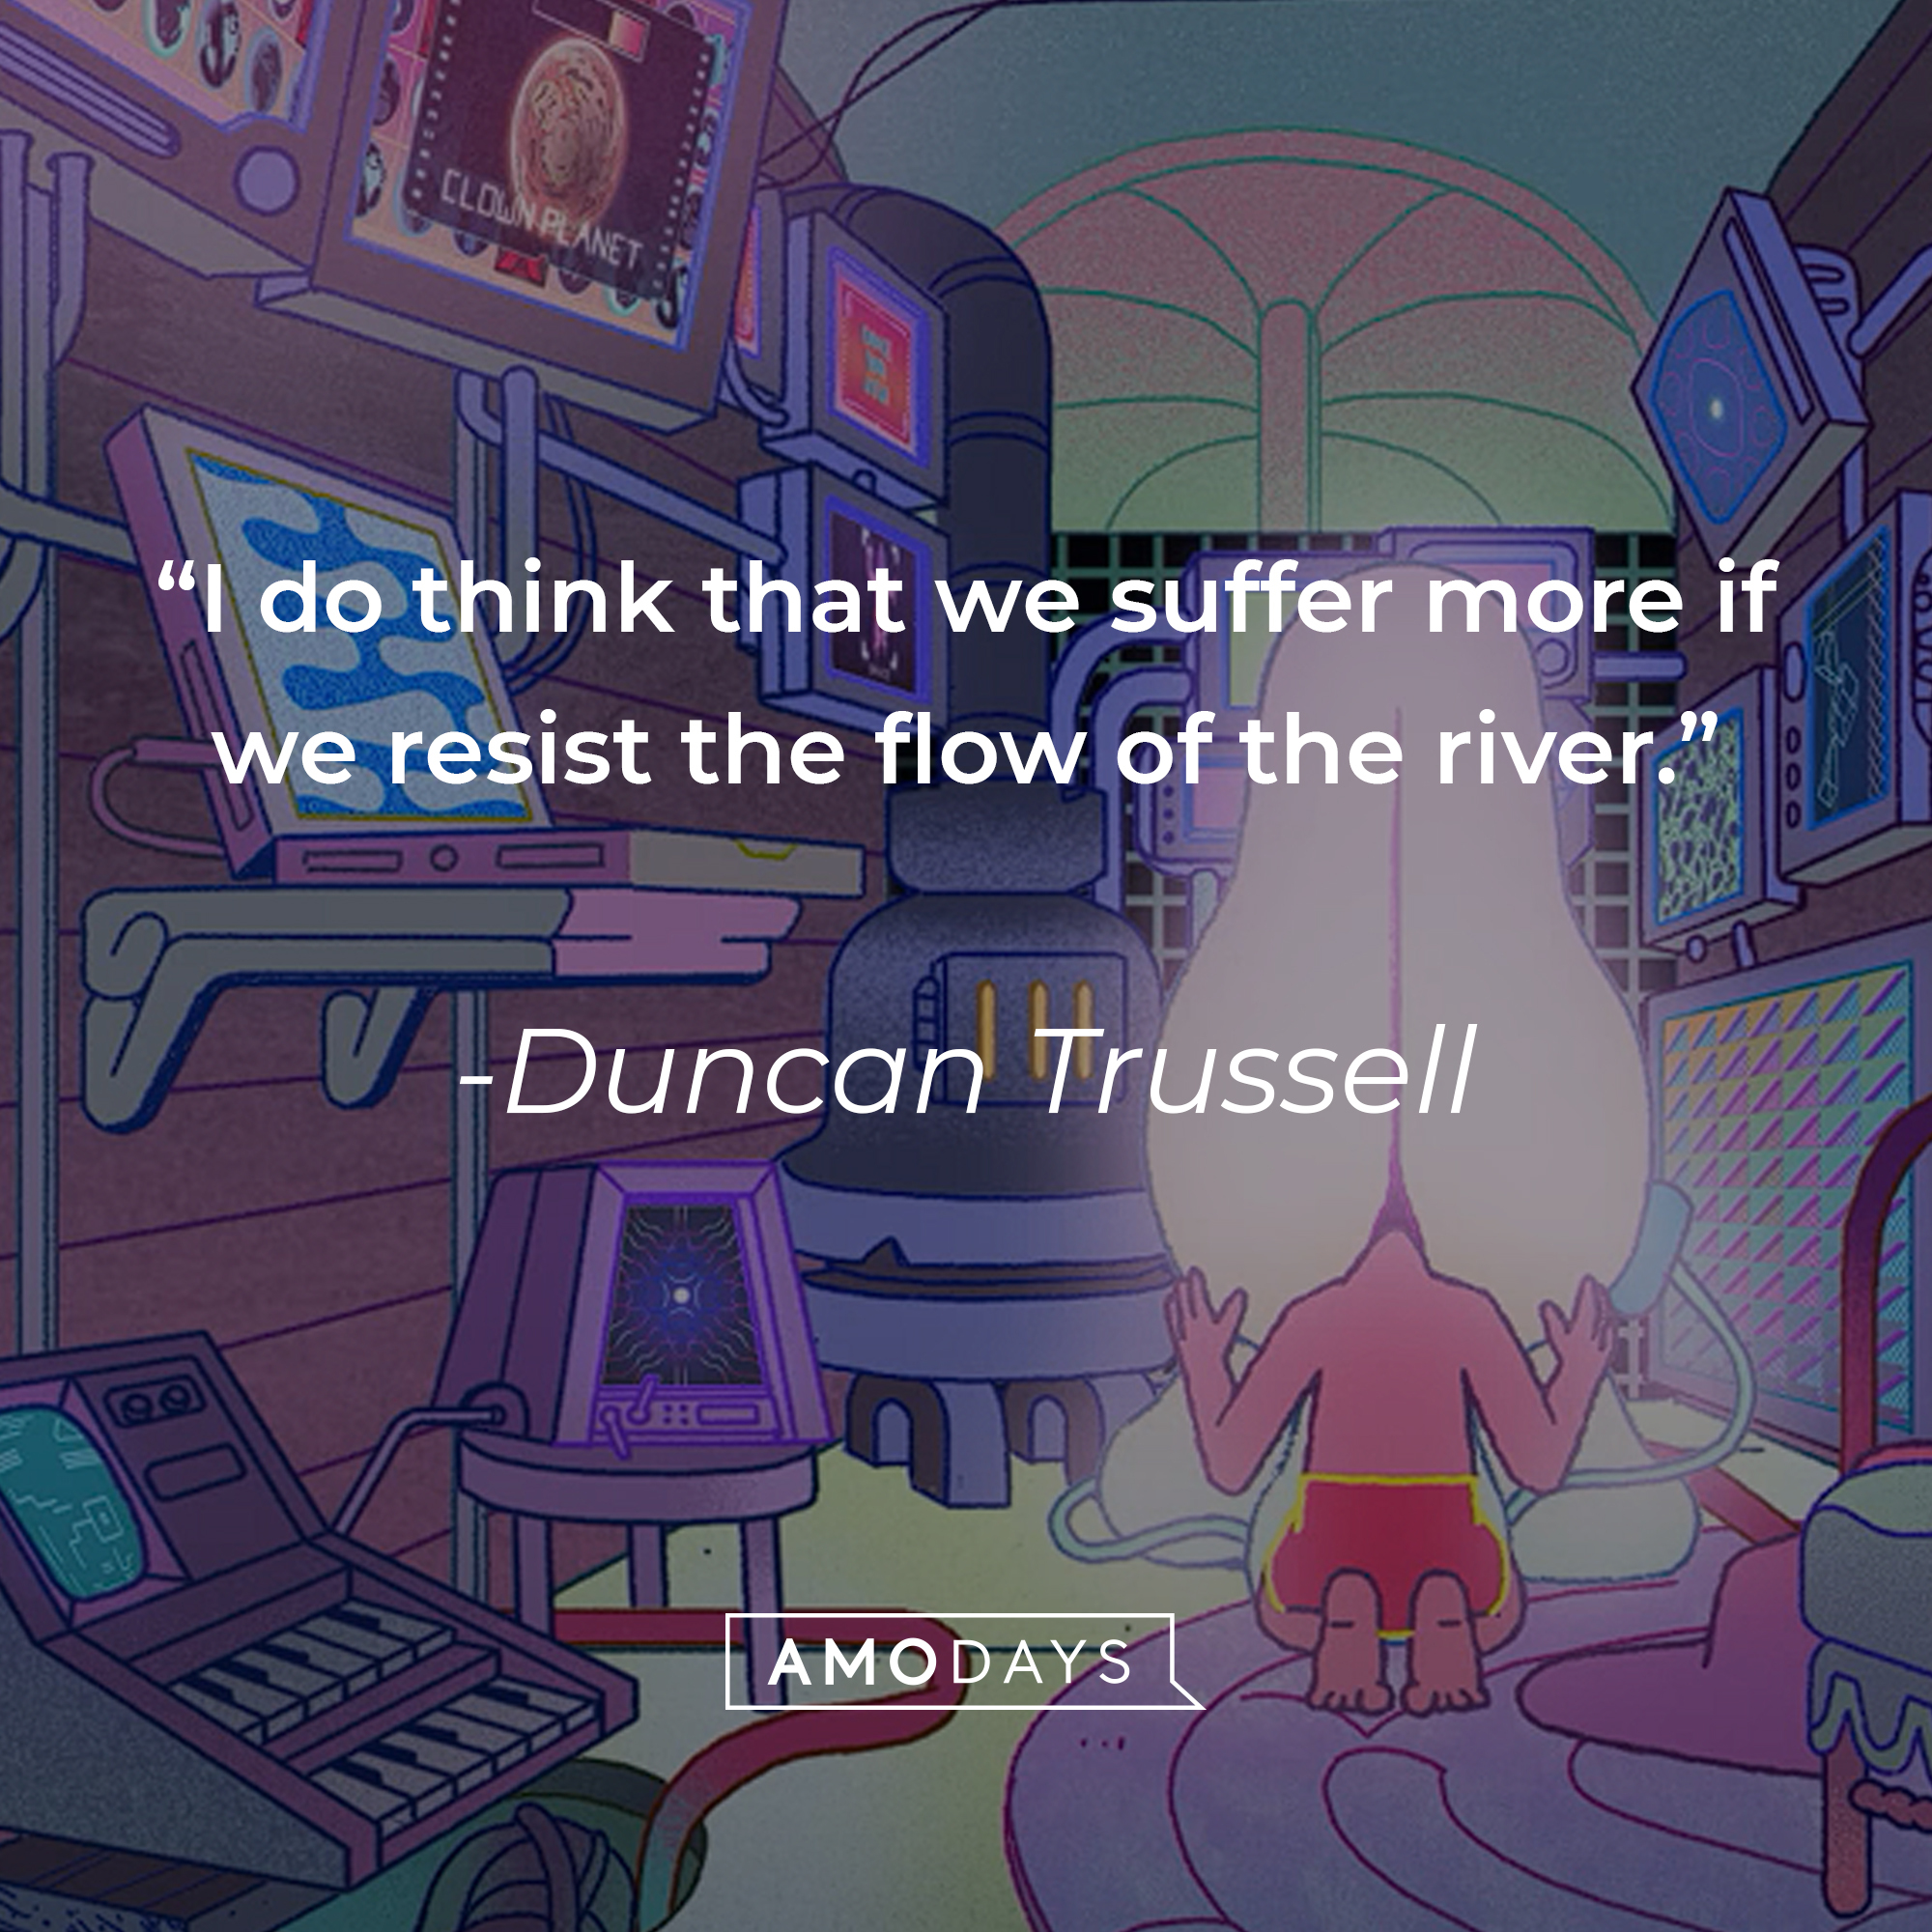 Duncan Trussell's quote: "I do think that we suffer more if we resist the flow of the river." | Source: youtube.com/Netflix